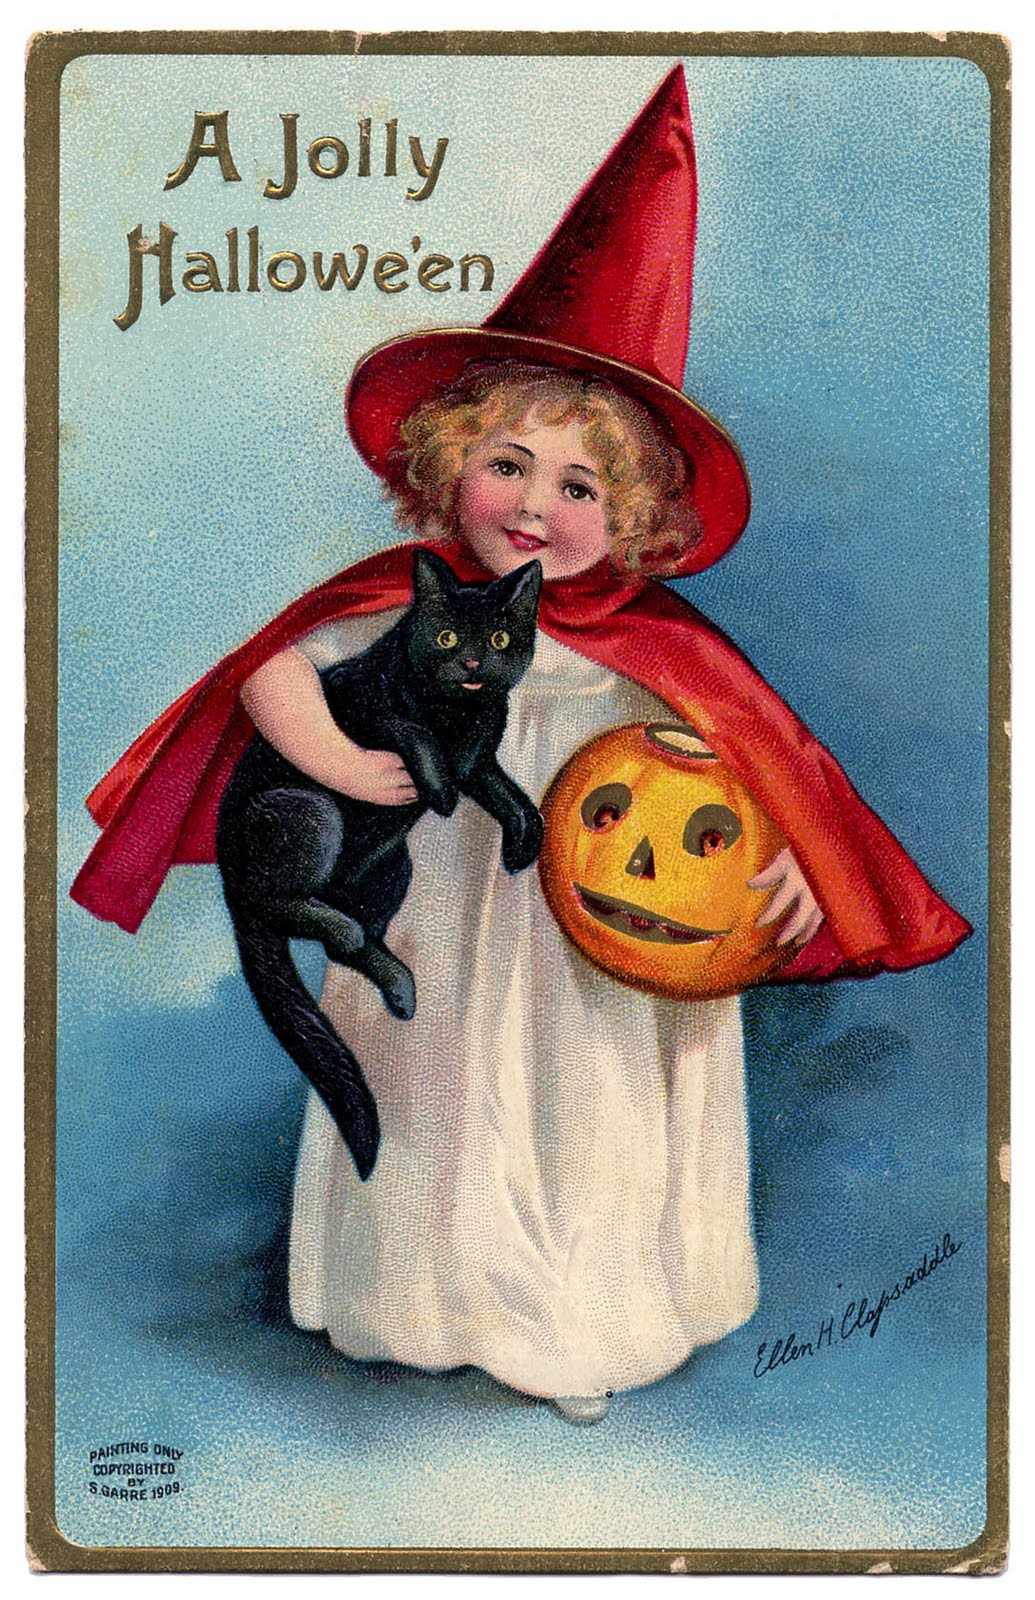 Vintage Halloween Clip Art - Darling Little Witch Girl - The Graphics Fairy